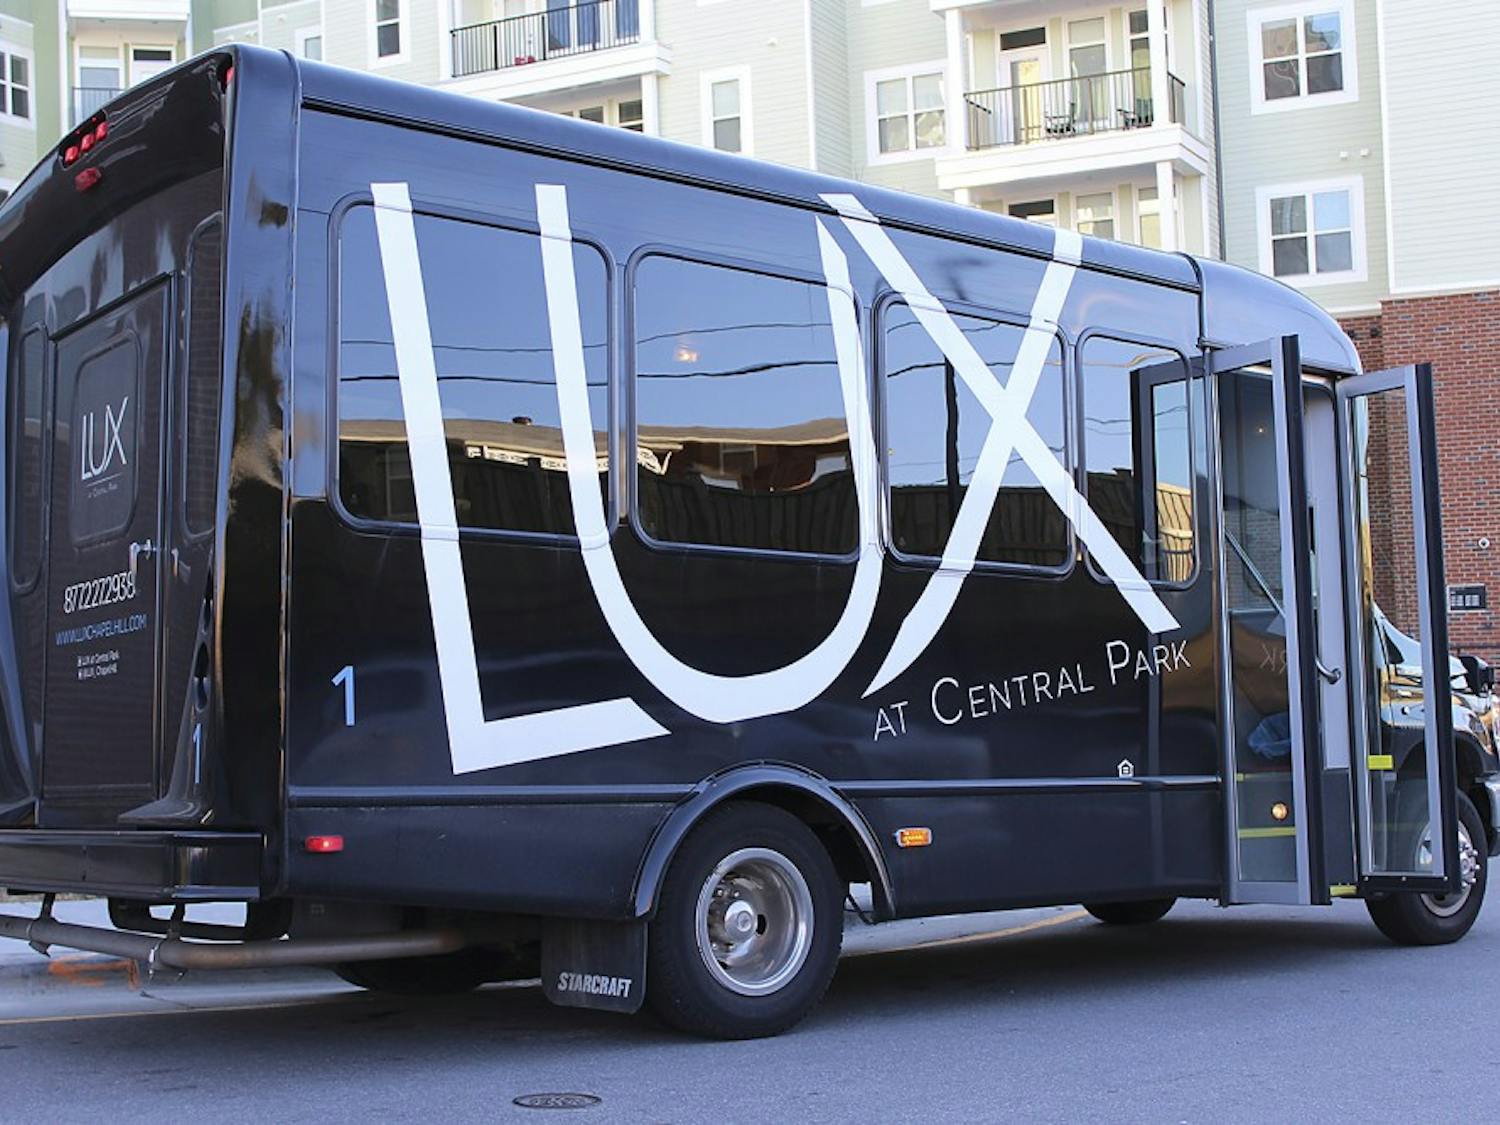 The Lux shuttles are scheduled to pick up residents every fifteen minutes. The apartment complex provides shuttle stops around campus Monday through Friday and a late night shuttle system along Franklin Street and Rosemary Street Thursday through Saturday. 